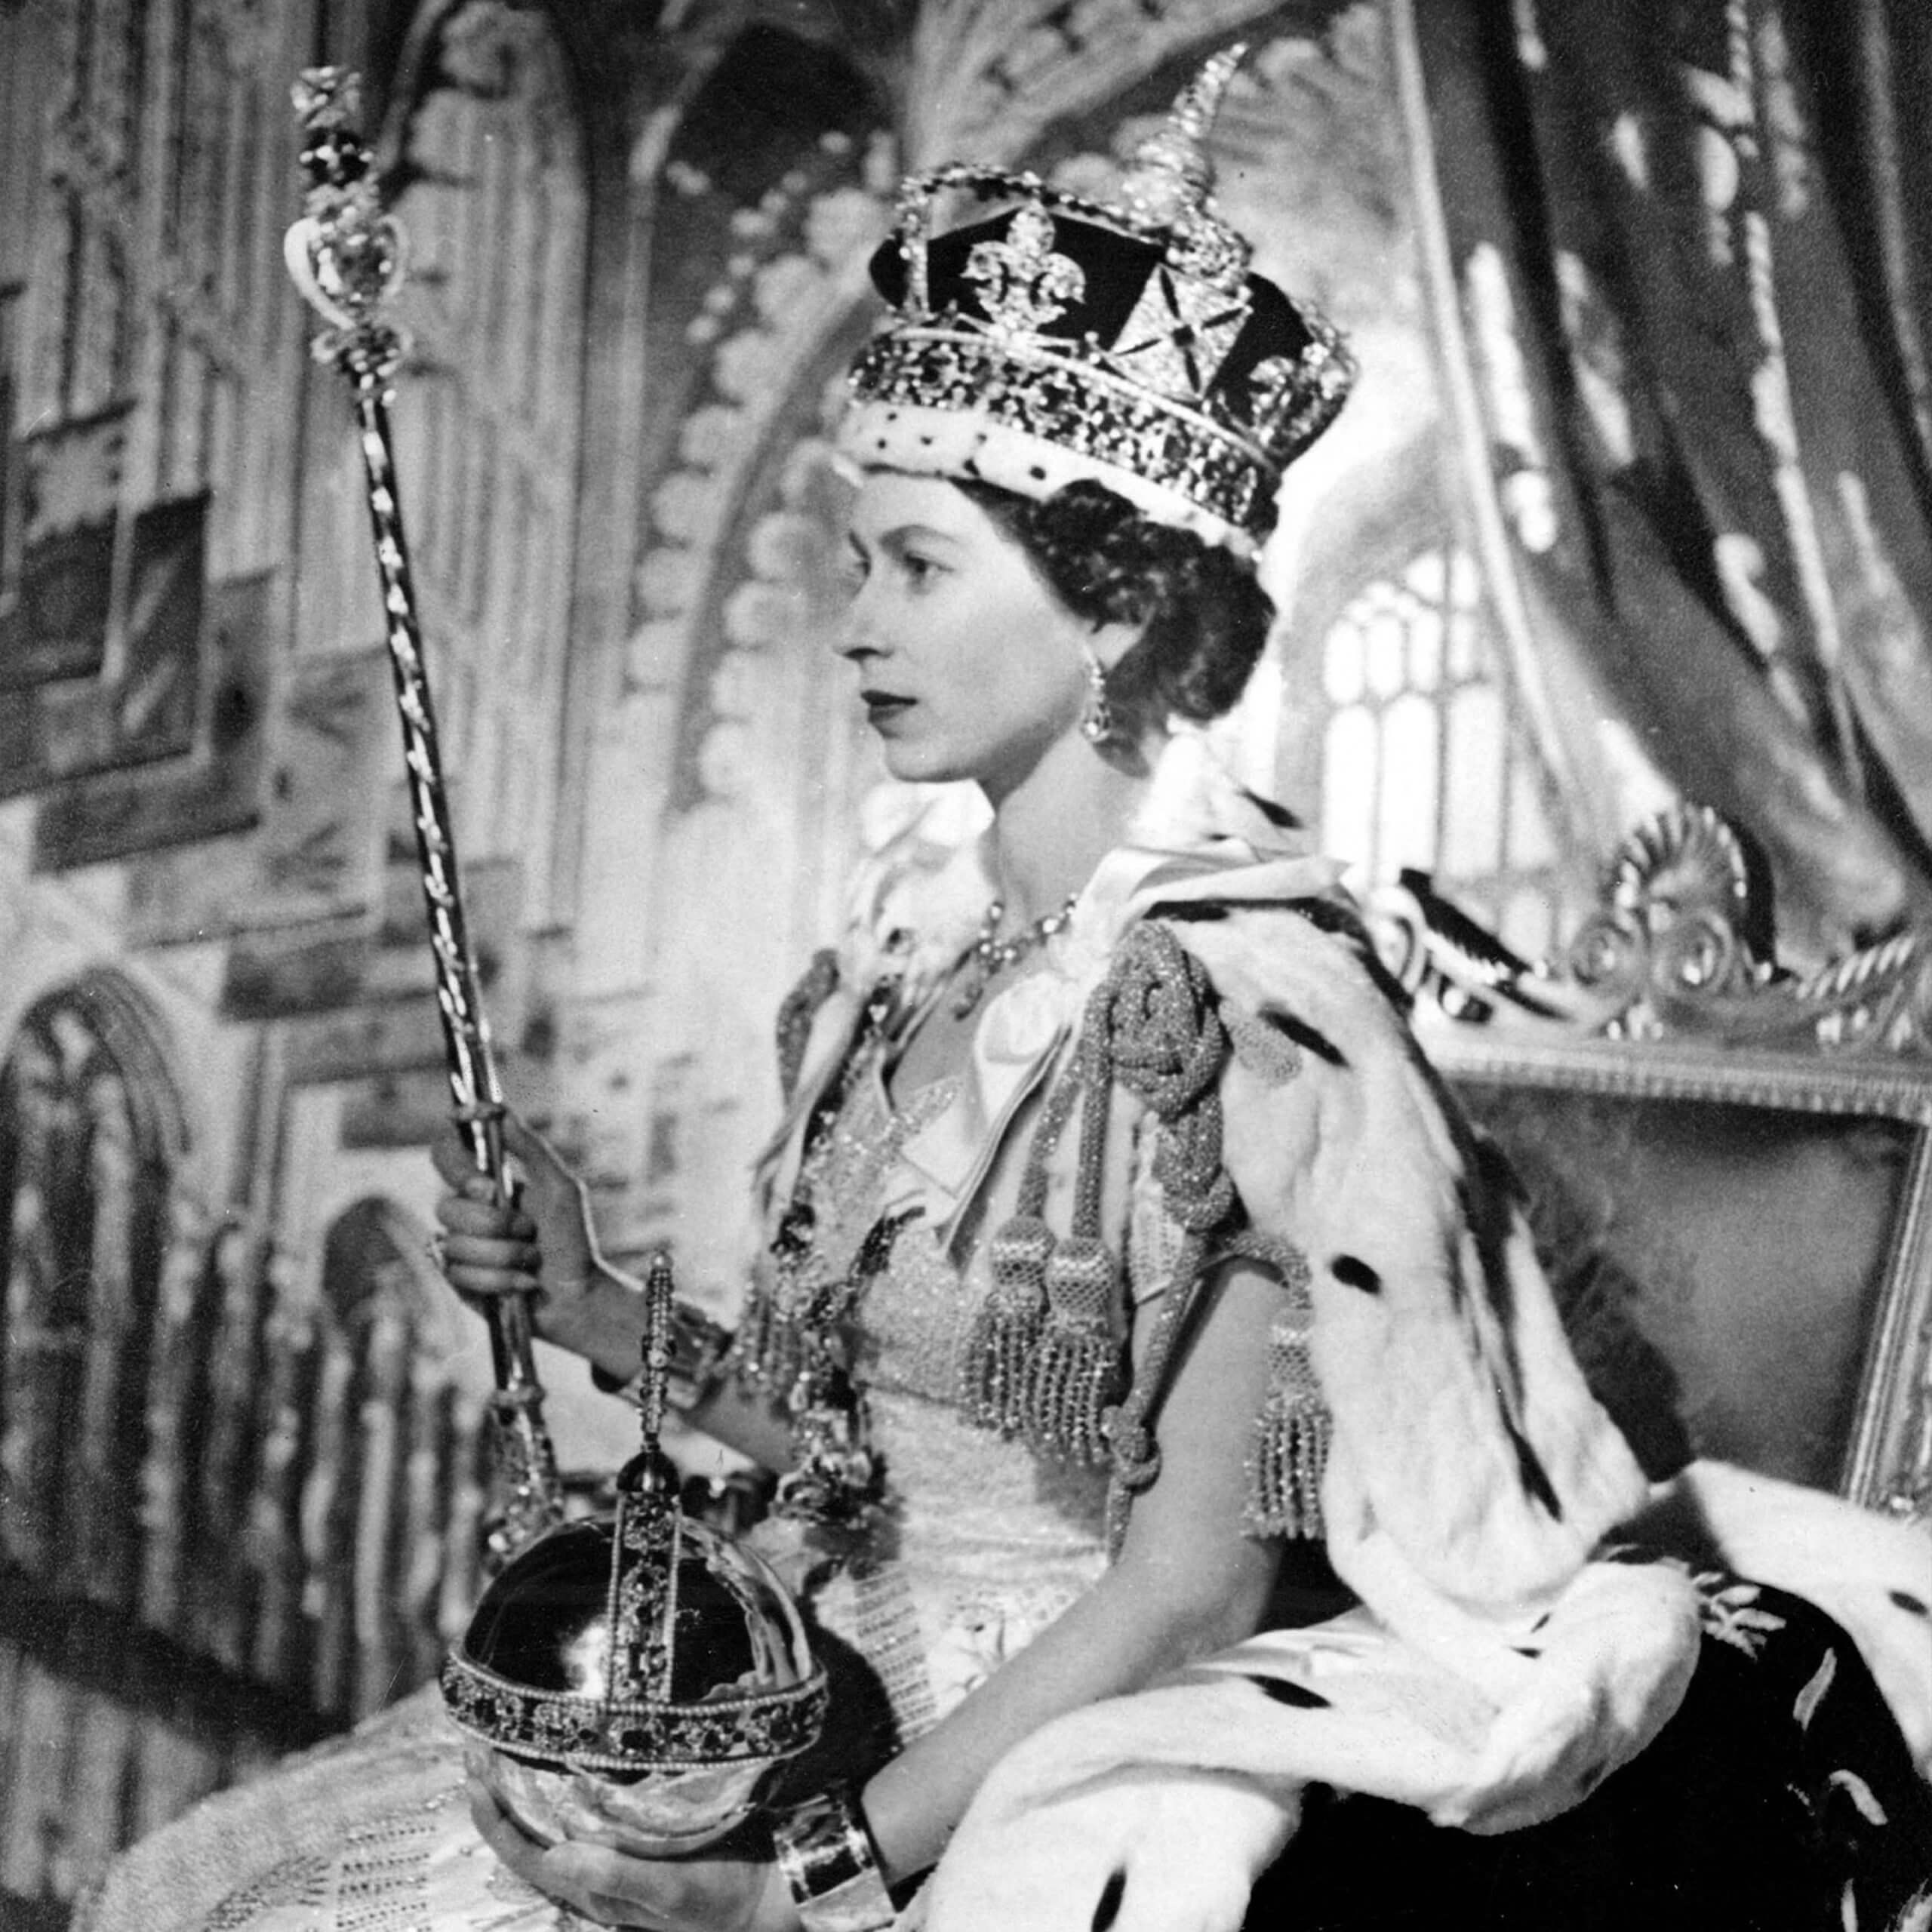 Jun 05 1953 London UK QUEEN ELIZABETH after her coronation on June 2nd 1953 wearing the Imperial State Crown1x1 scaled